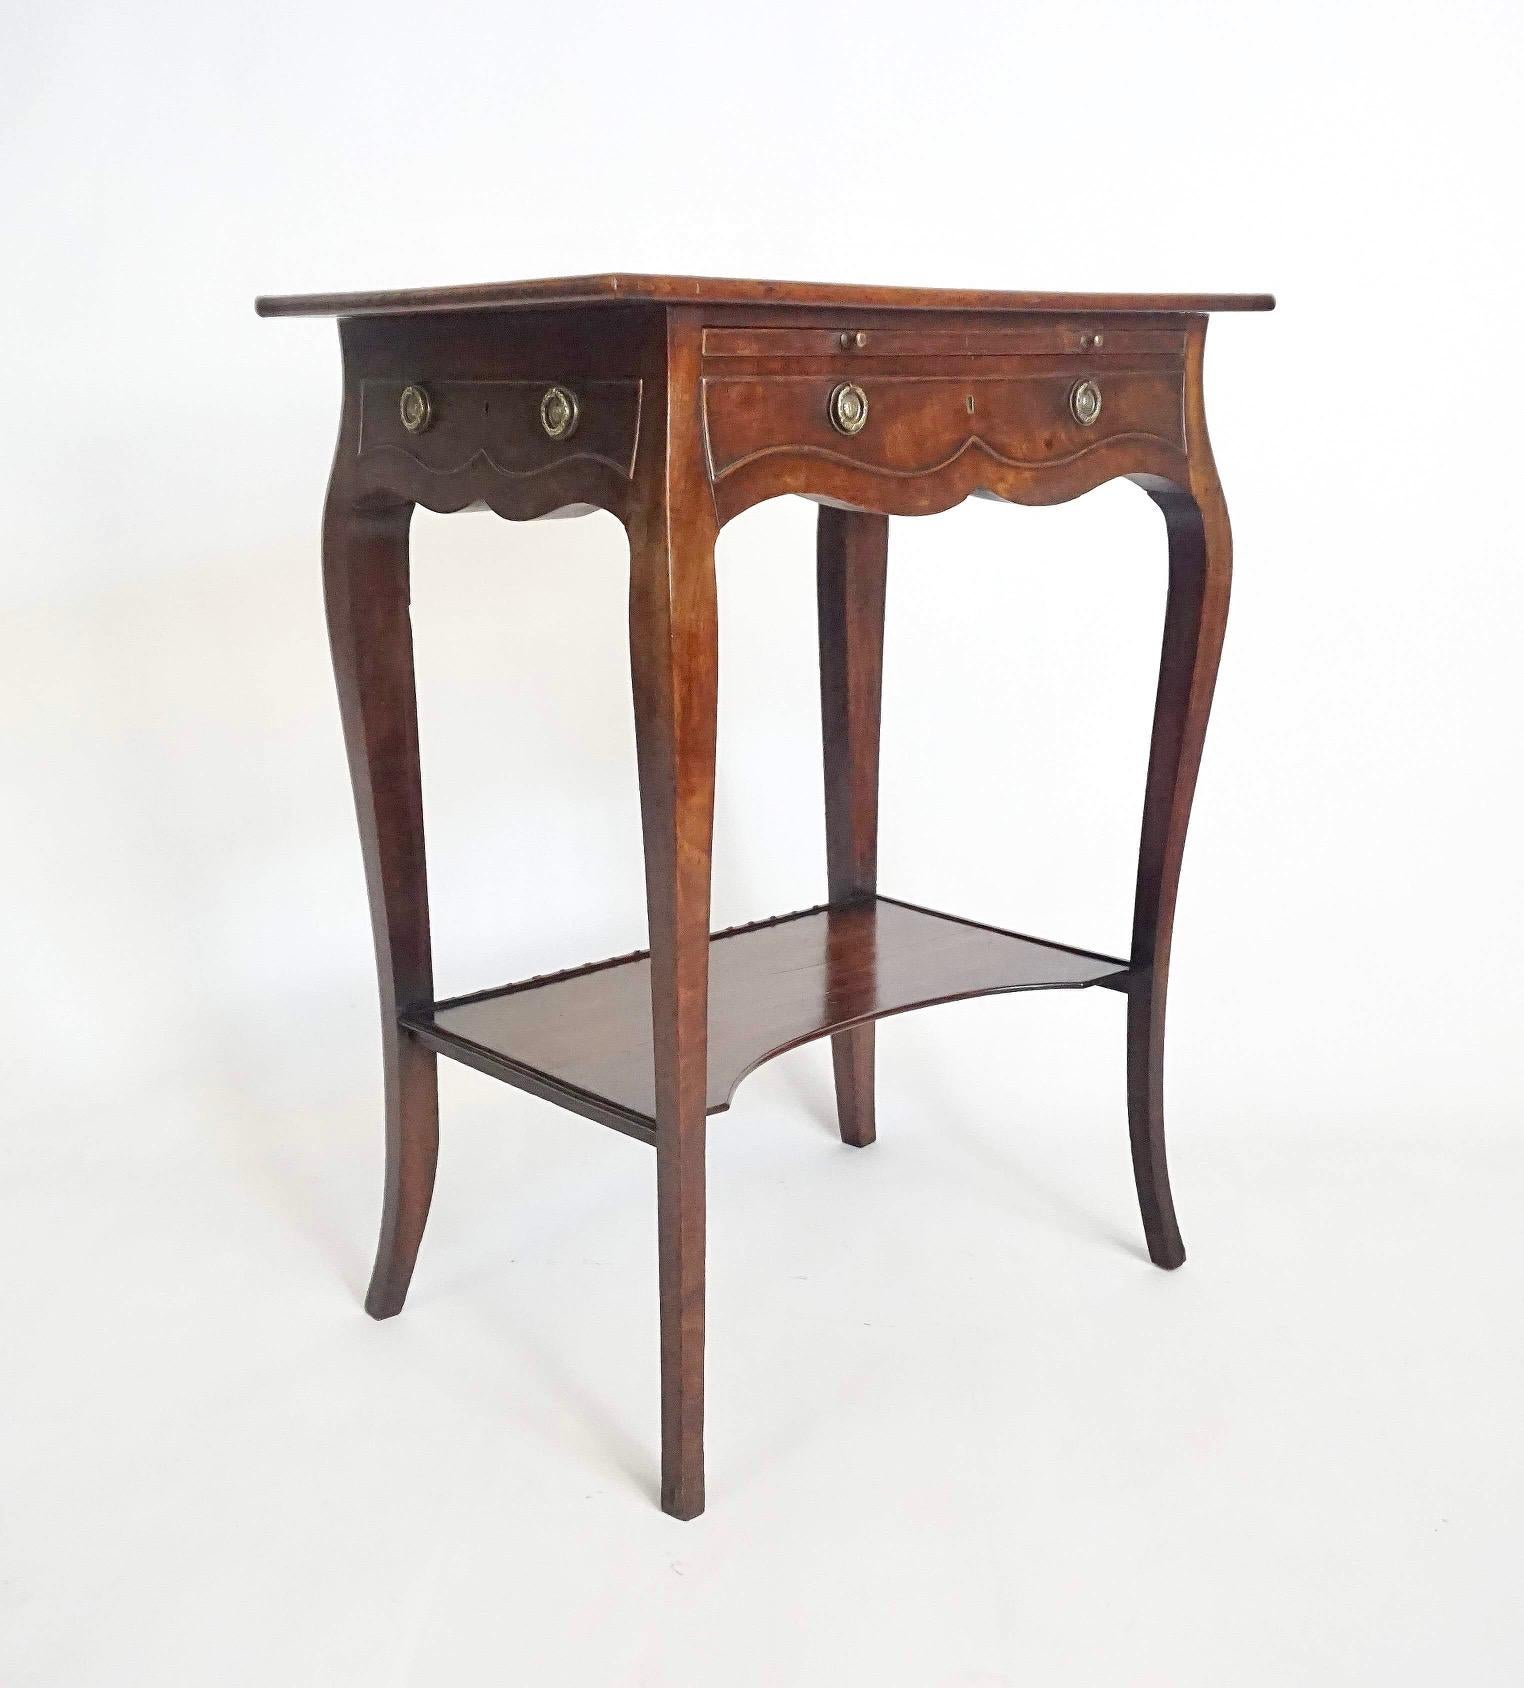 Rococo English George III Sabicu & Gonçalo Alves Work Table in the Manner of John Cobb For Sale